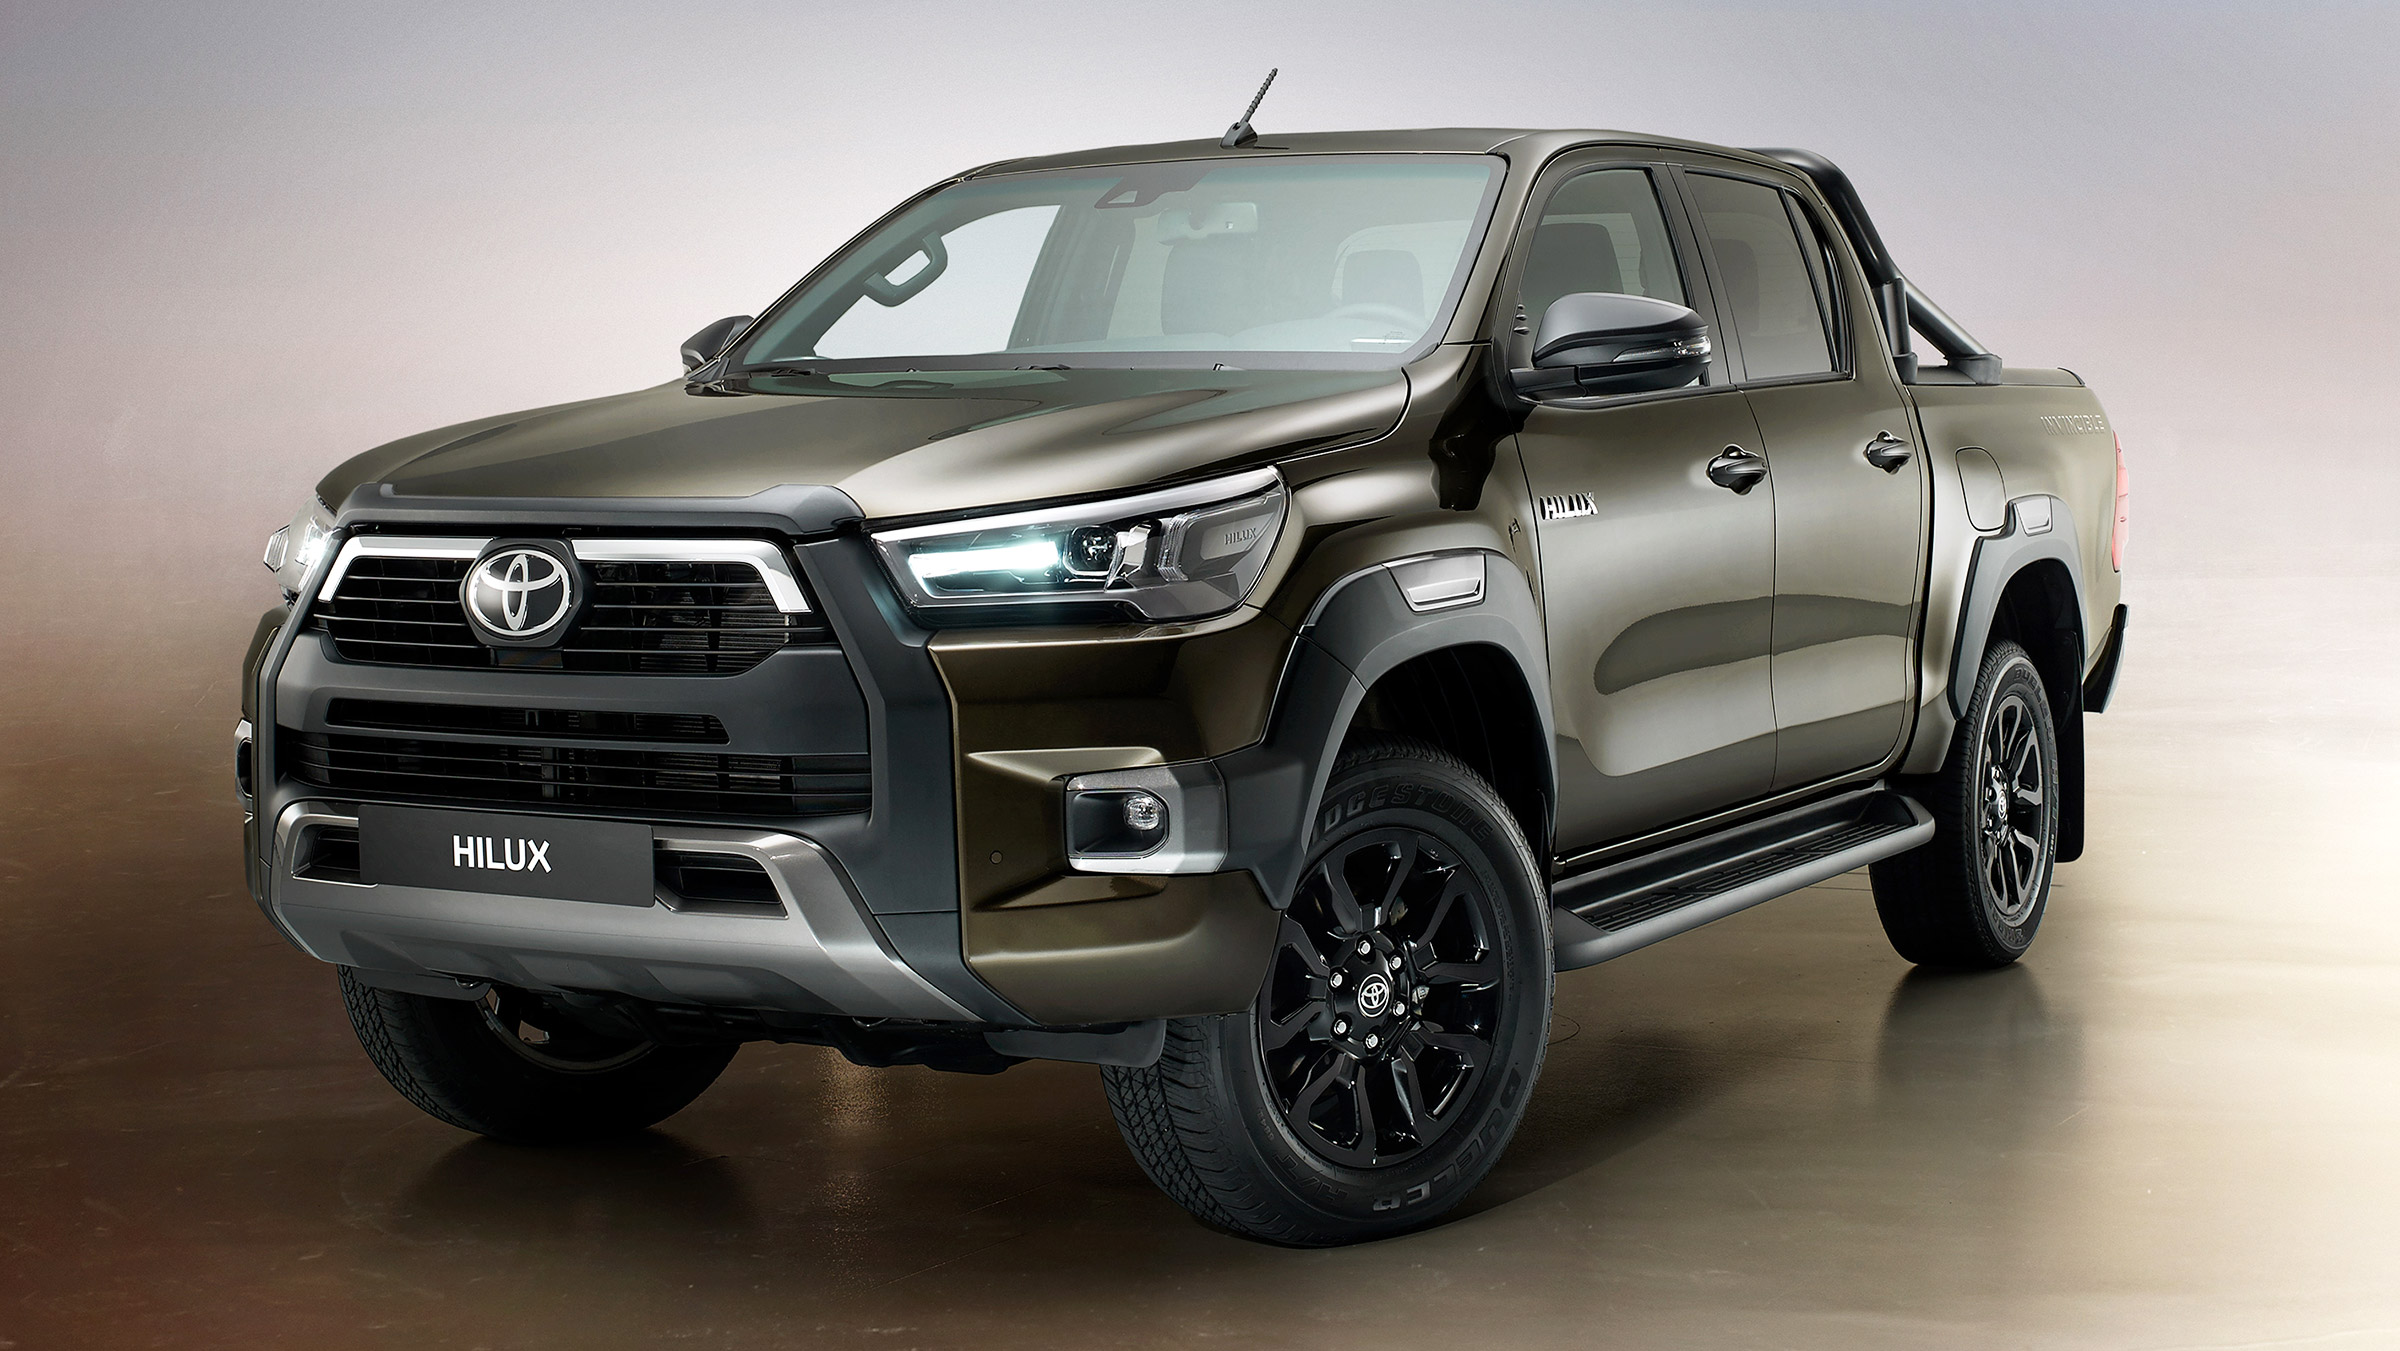 Facelifted Toyota Hilux unveiled with new 201bhp diesel